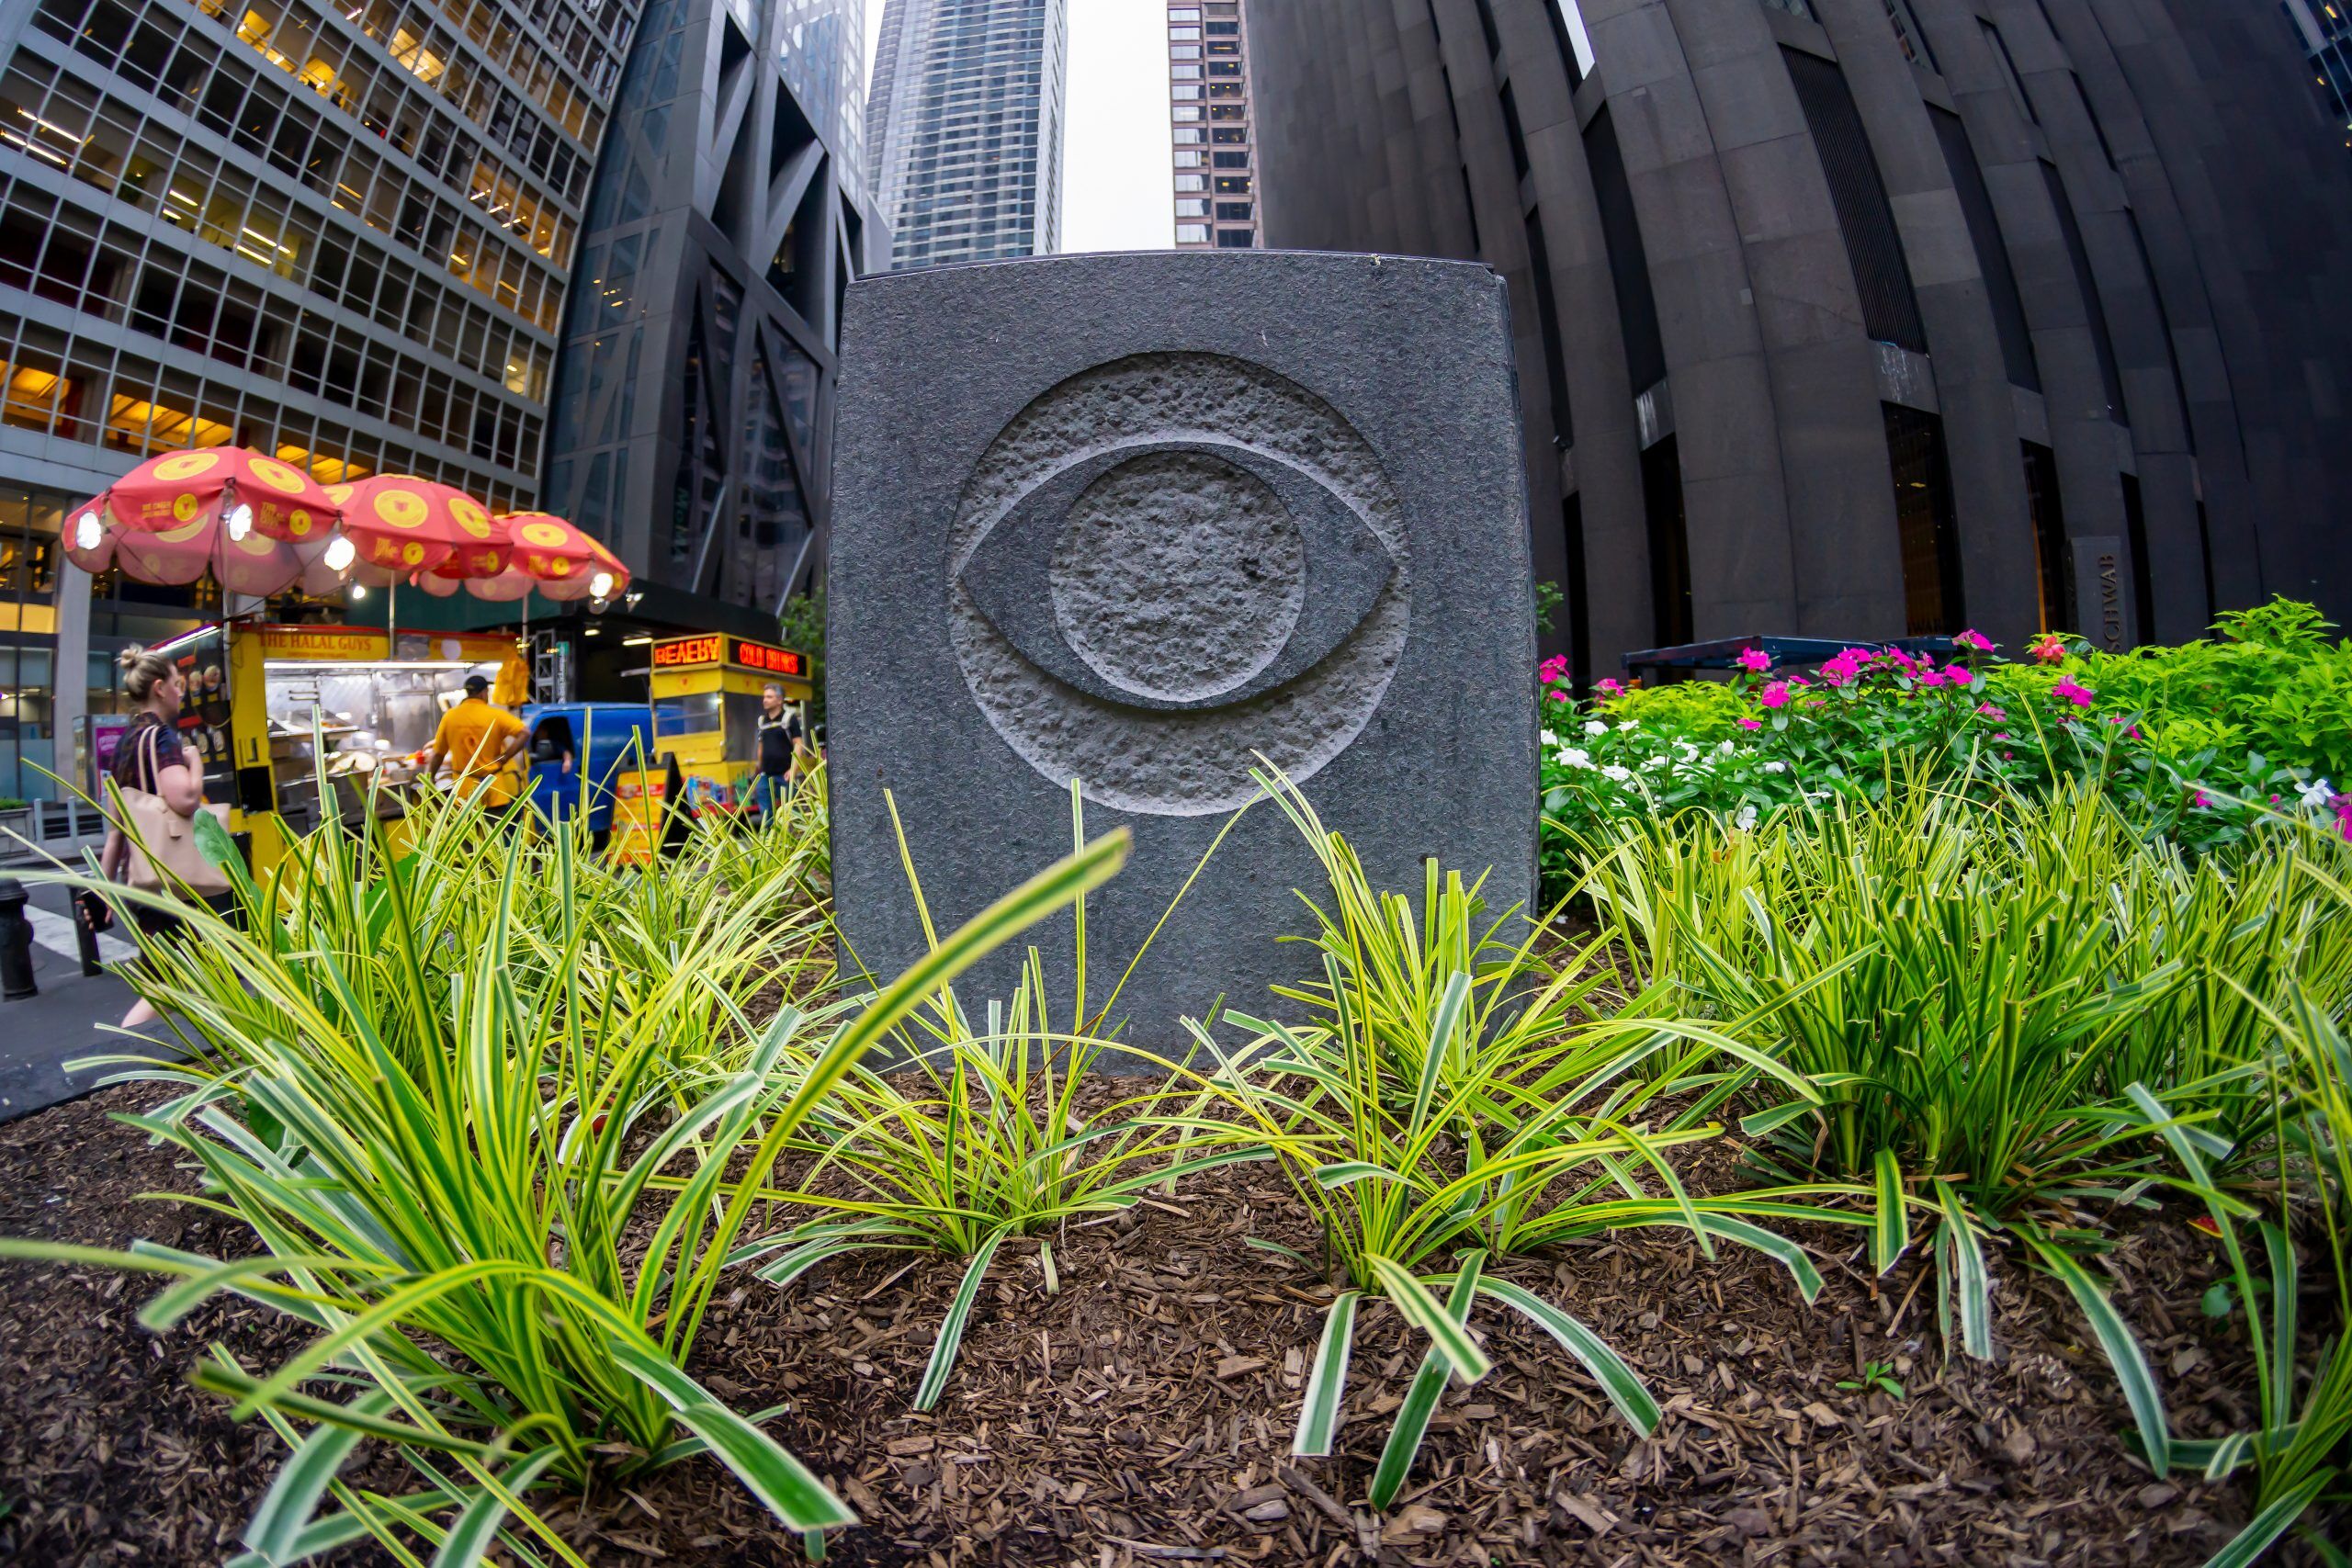 New York NY - A decorative element with the CBS logo outside of Black Rock, the CBS headquarters in New York, August 13, 2019.